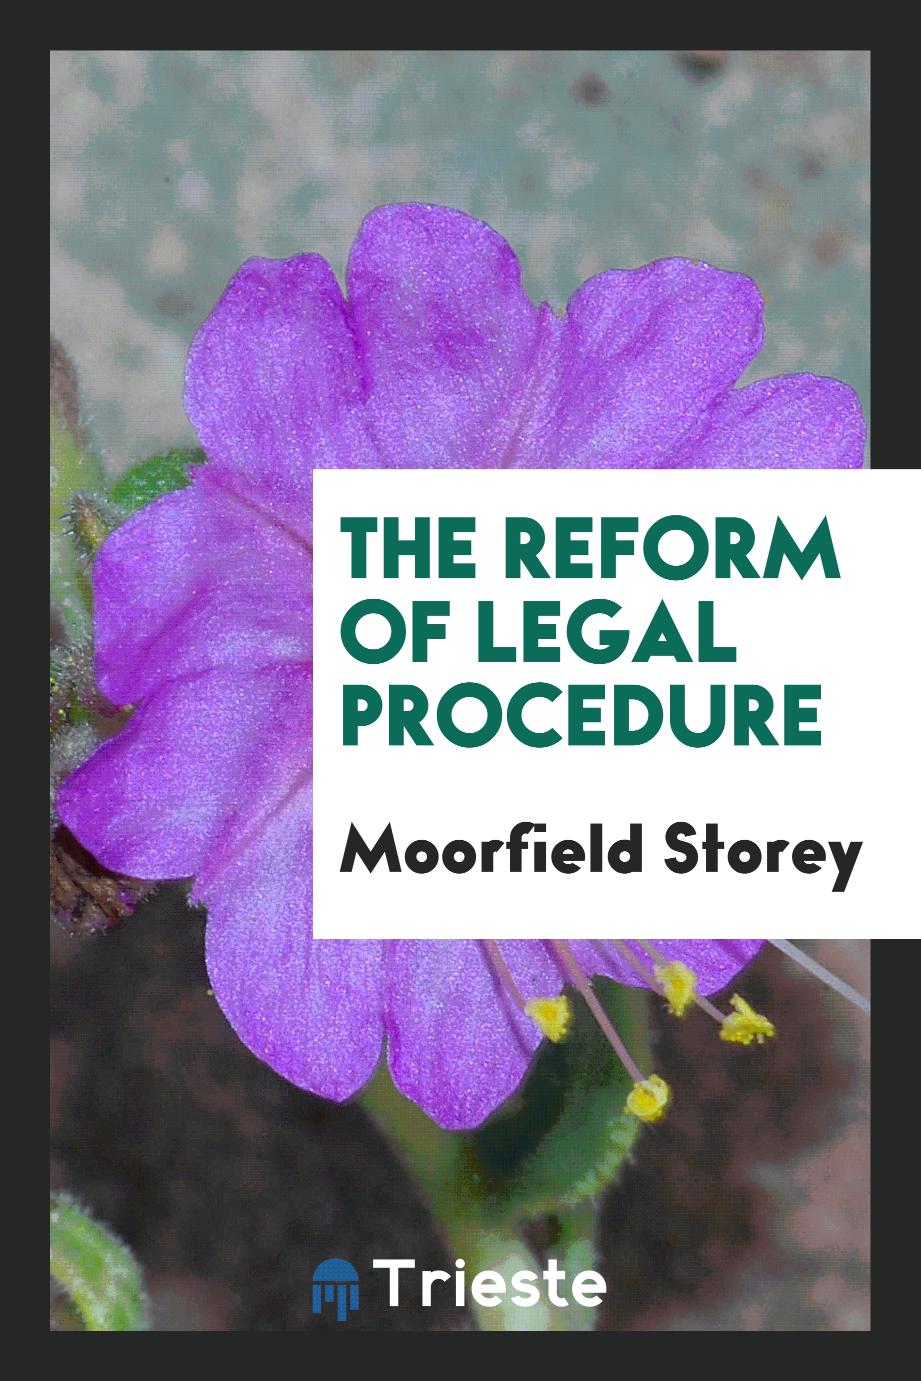 The reform of legal procedure